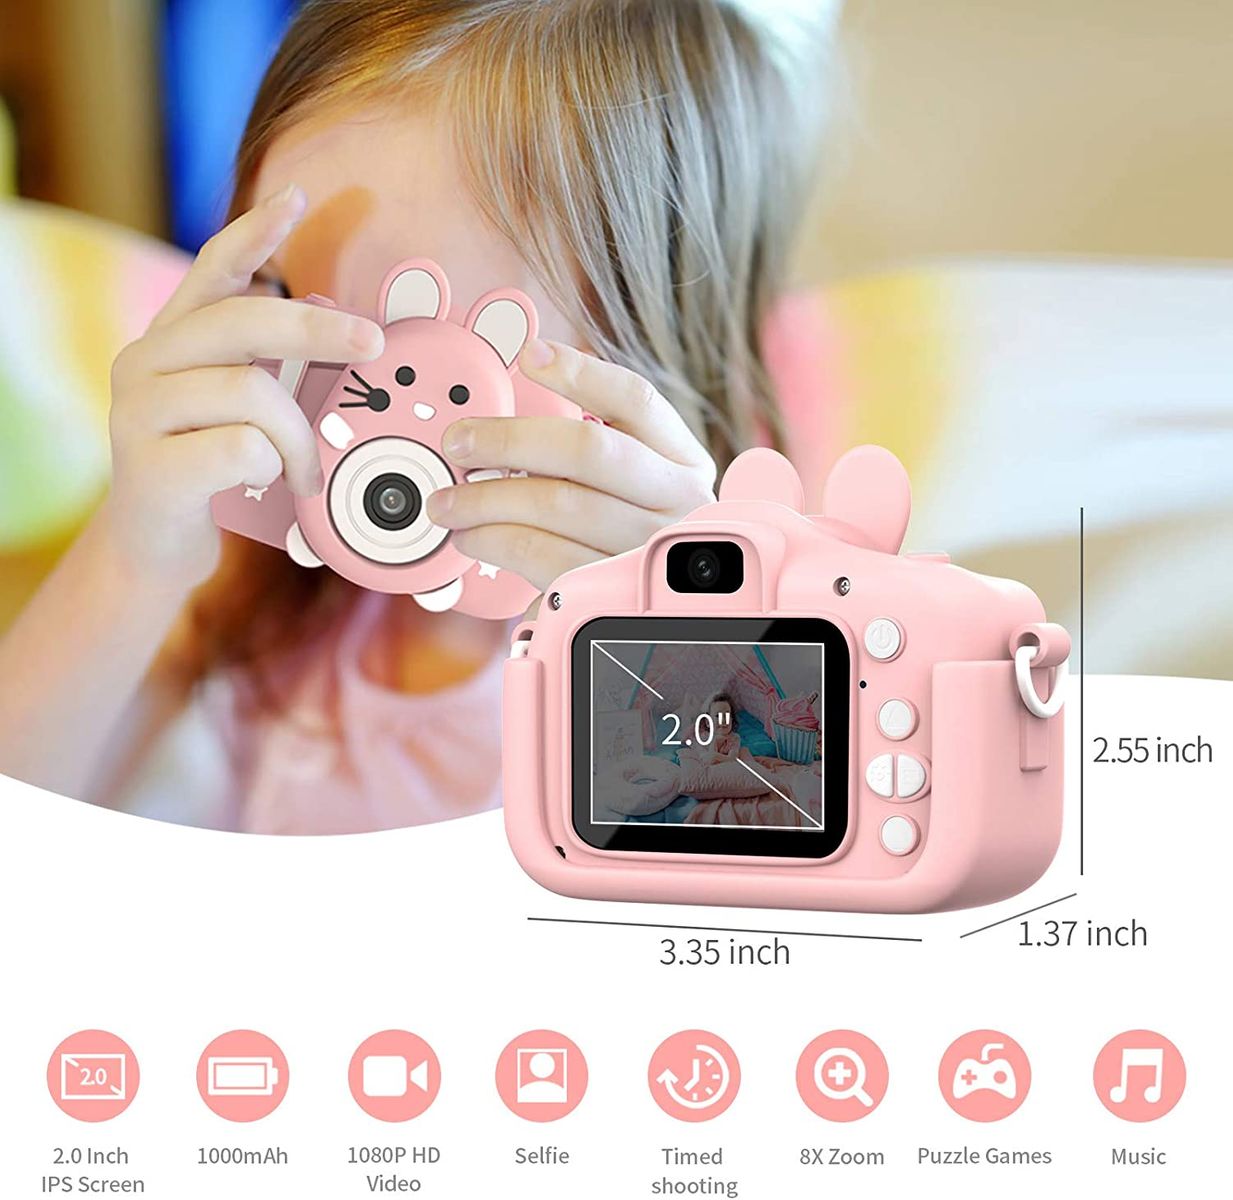 Hangrui Kids Camera with Silicone Case, 20.0MP Rechargeable Kids Digital Dual Camera with 2.0 Inch IPS Screen 1080P Video Camcorder, 32GB SD Card, Selfie Childrens Camera Toy for Boys & Girls Age 3-12, Pink A-Pink